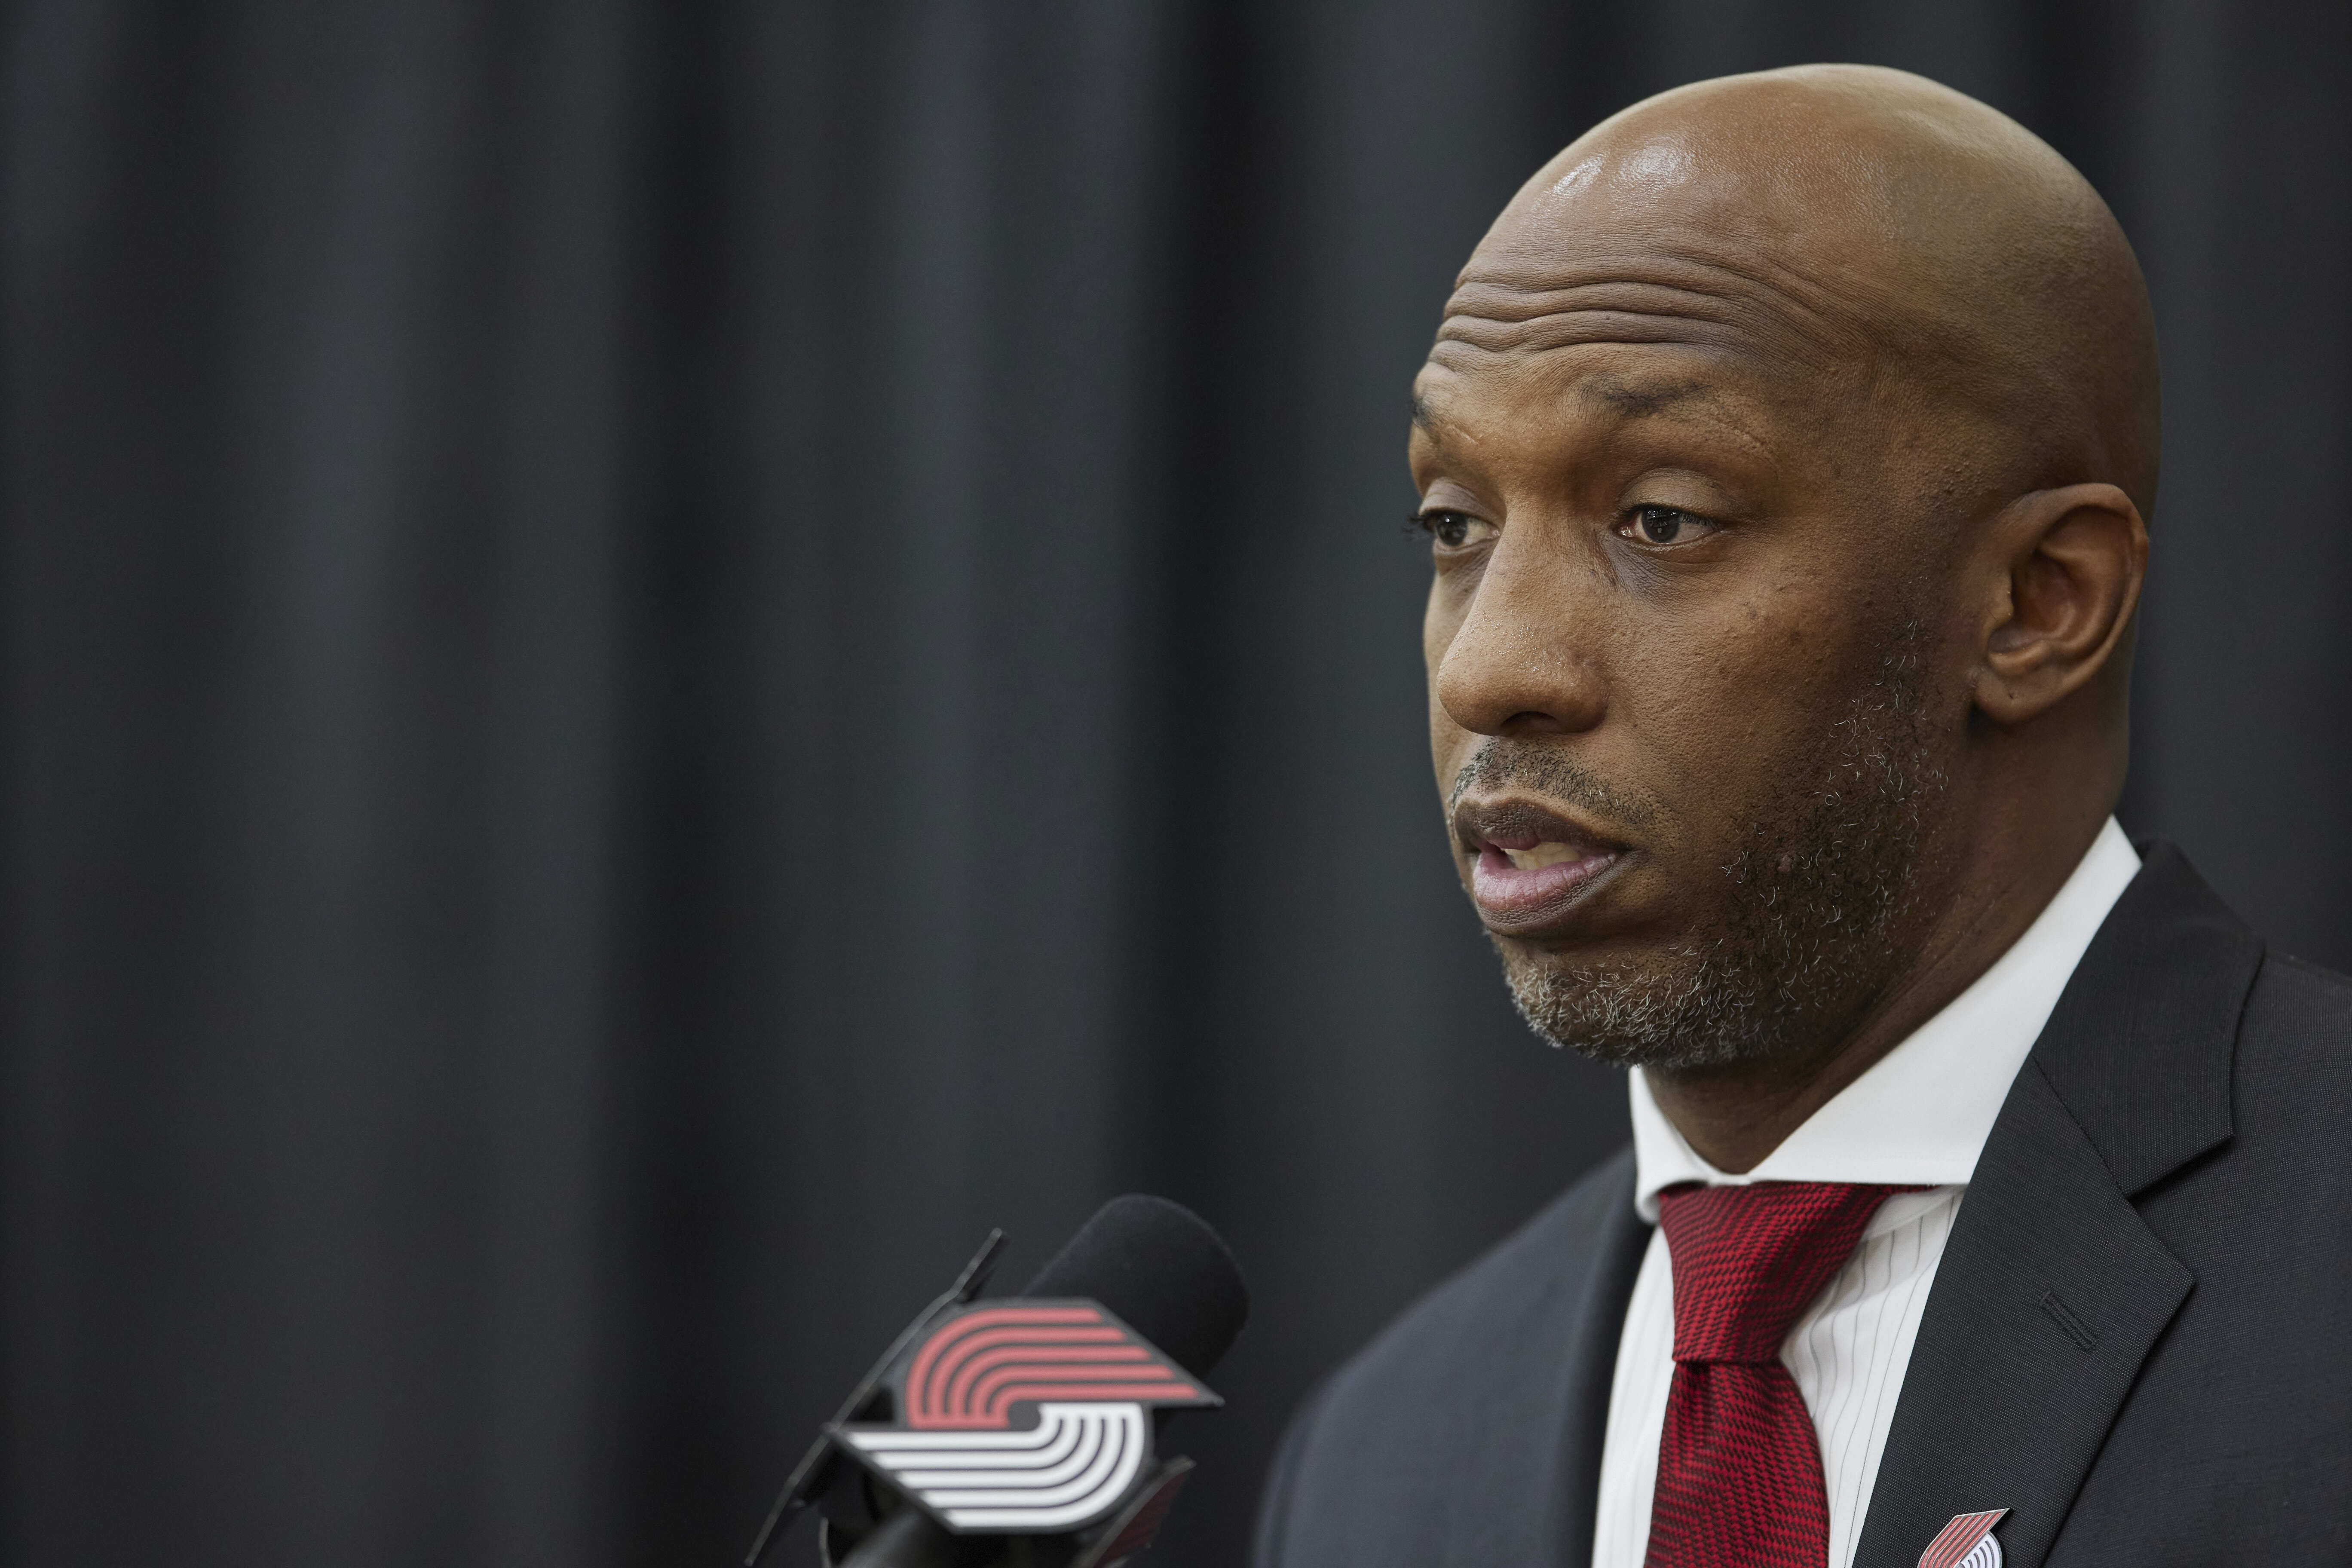 It's all over for Chauncey Billups